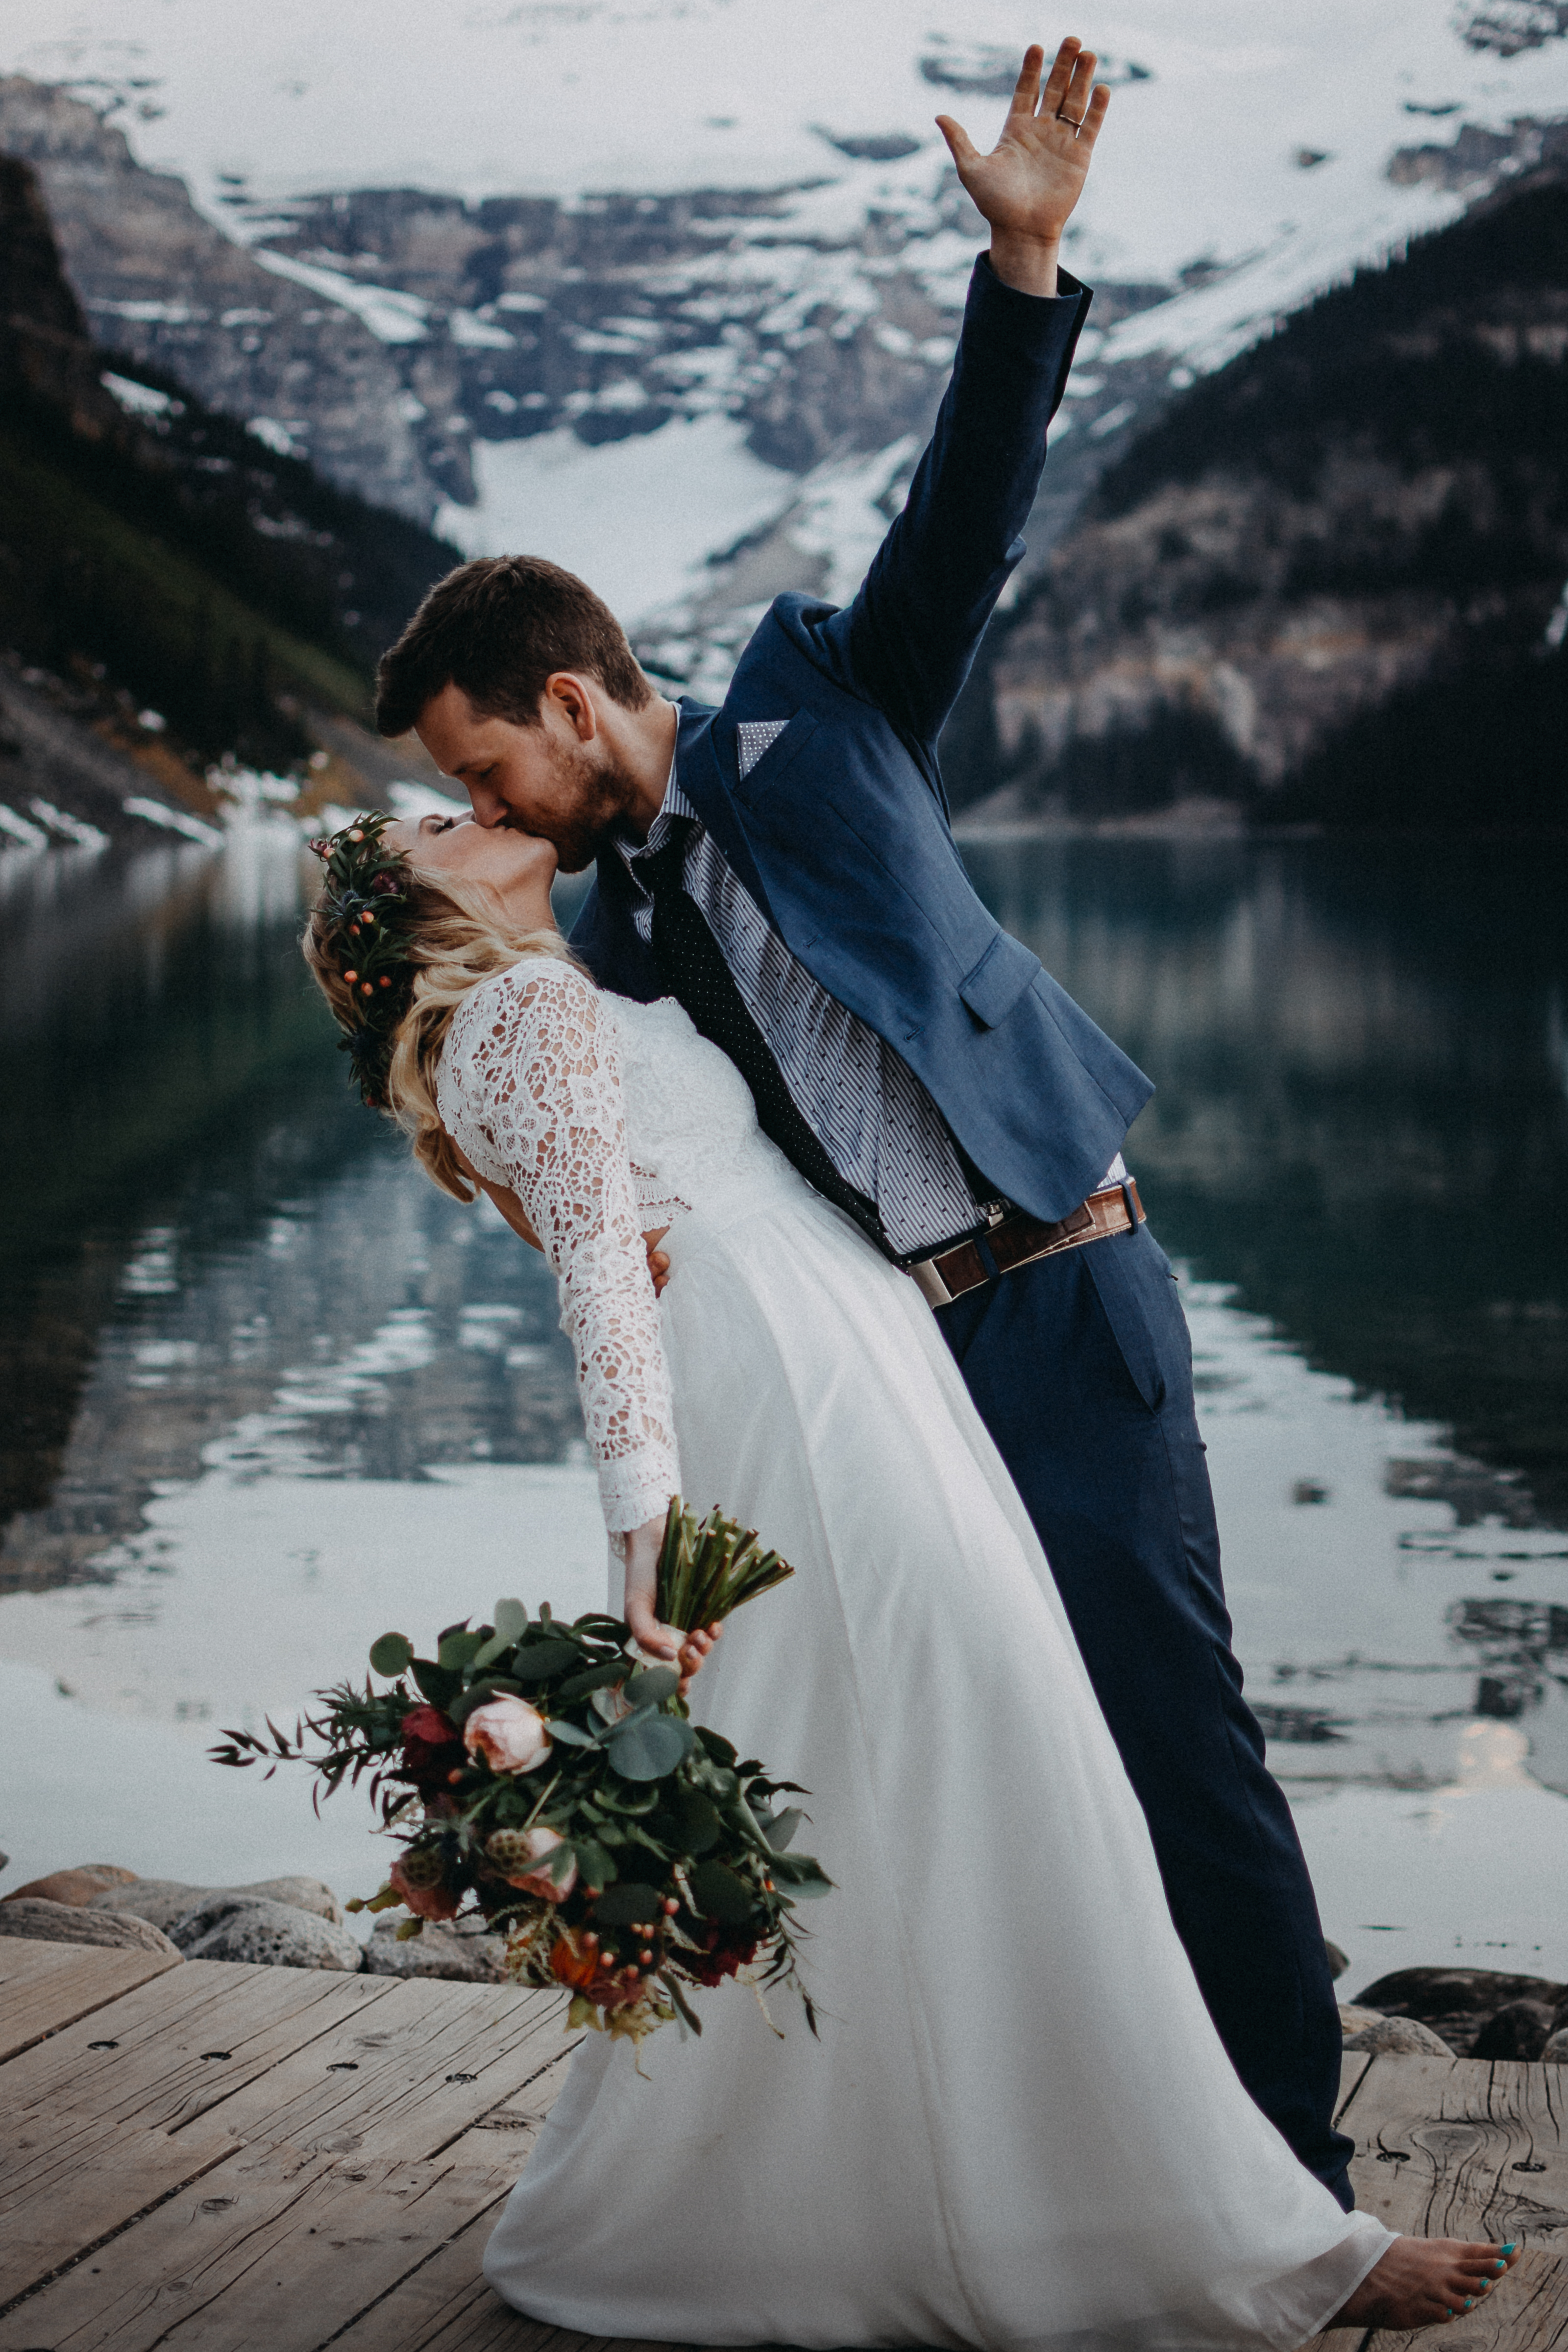 The groom dipping the bride and throwing his hand up in the air at Lake Louise, Alberta